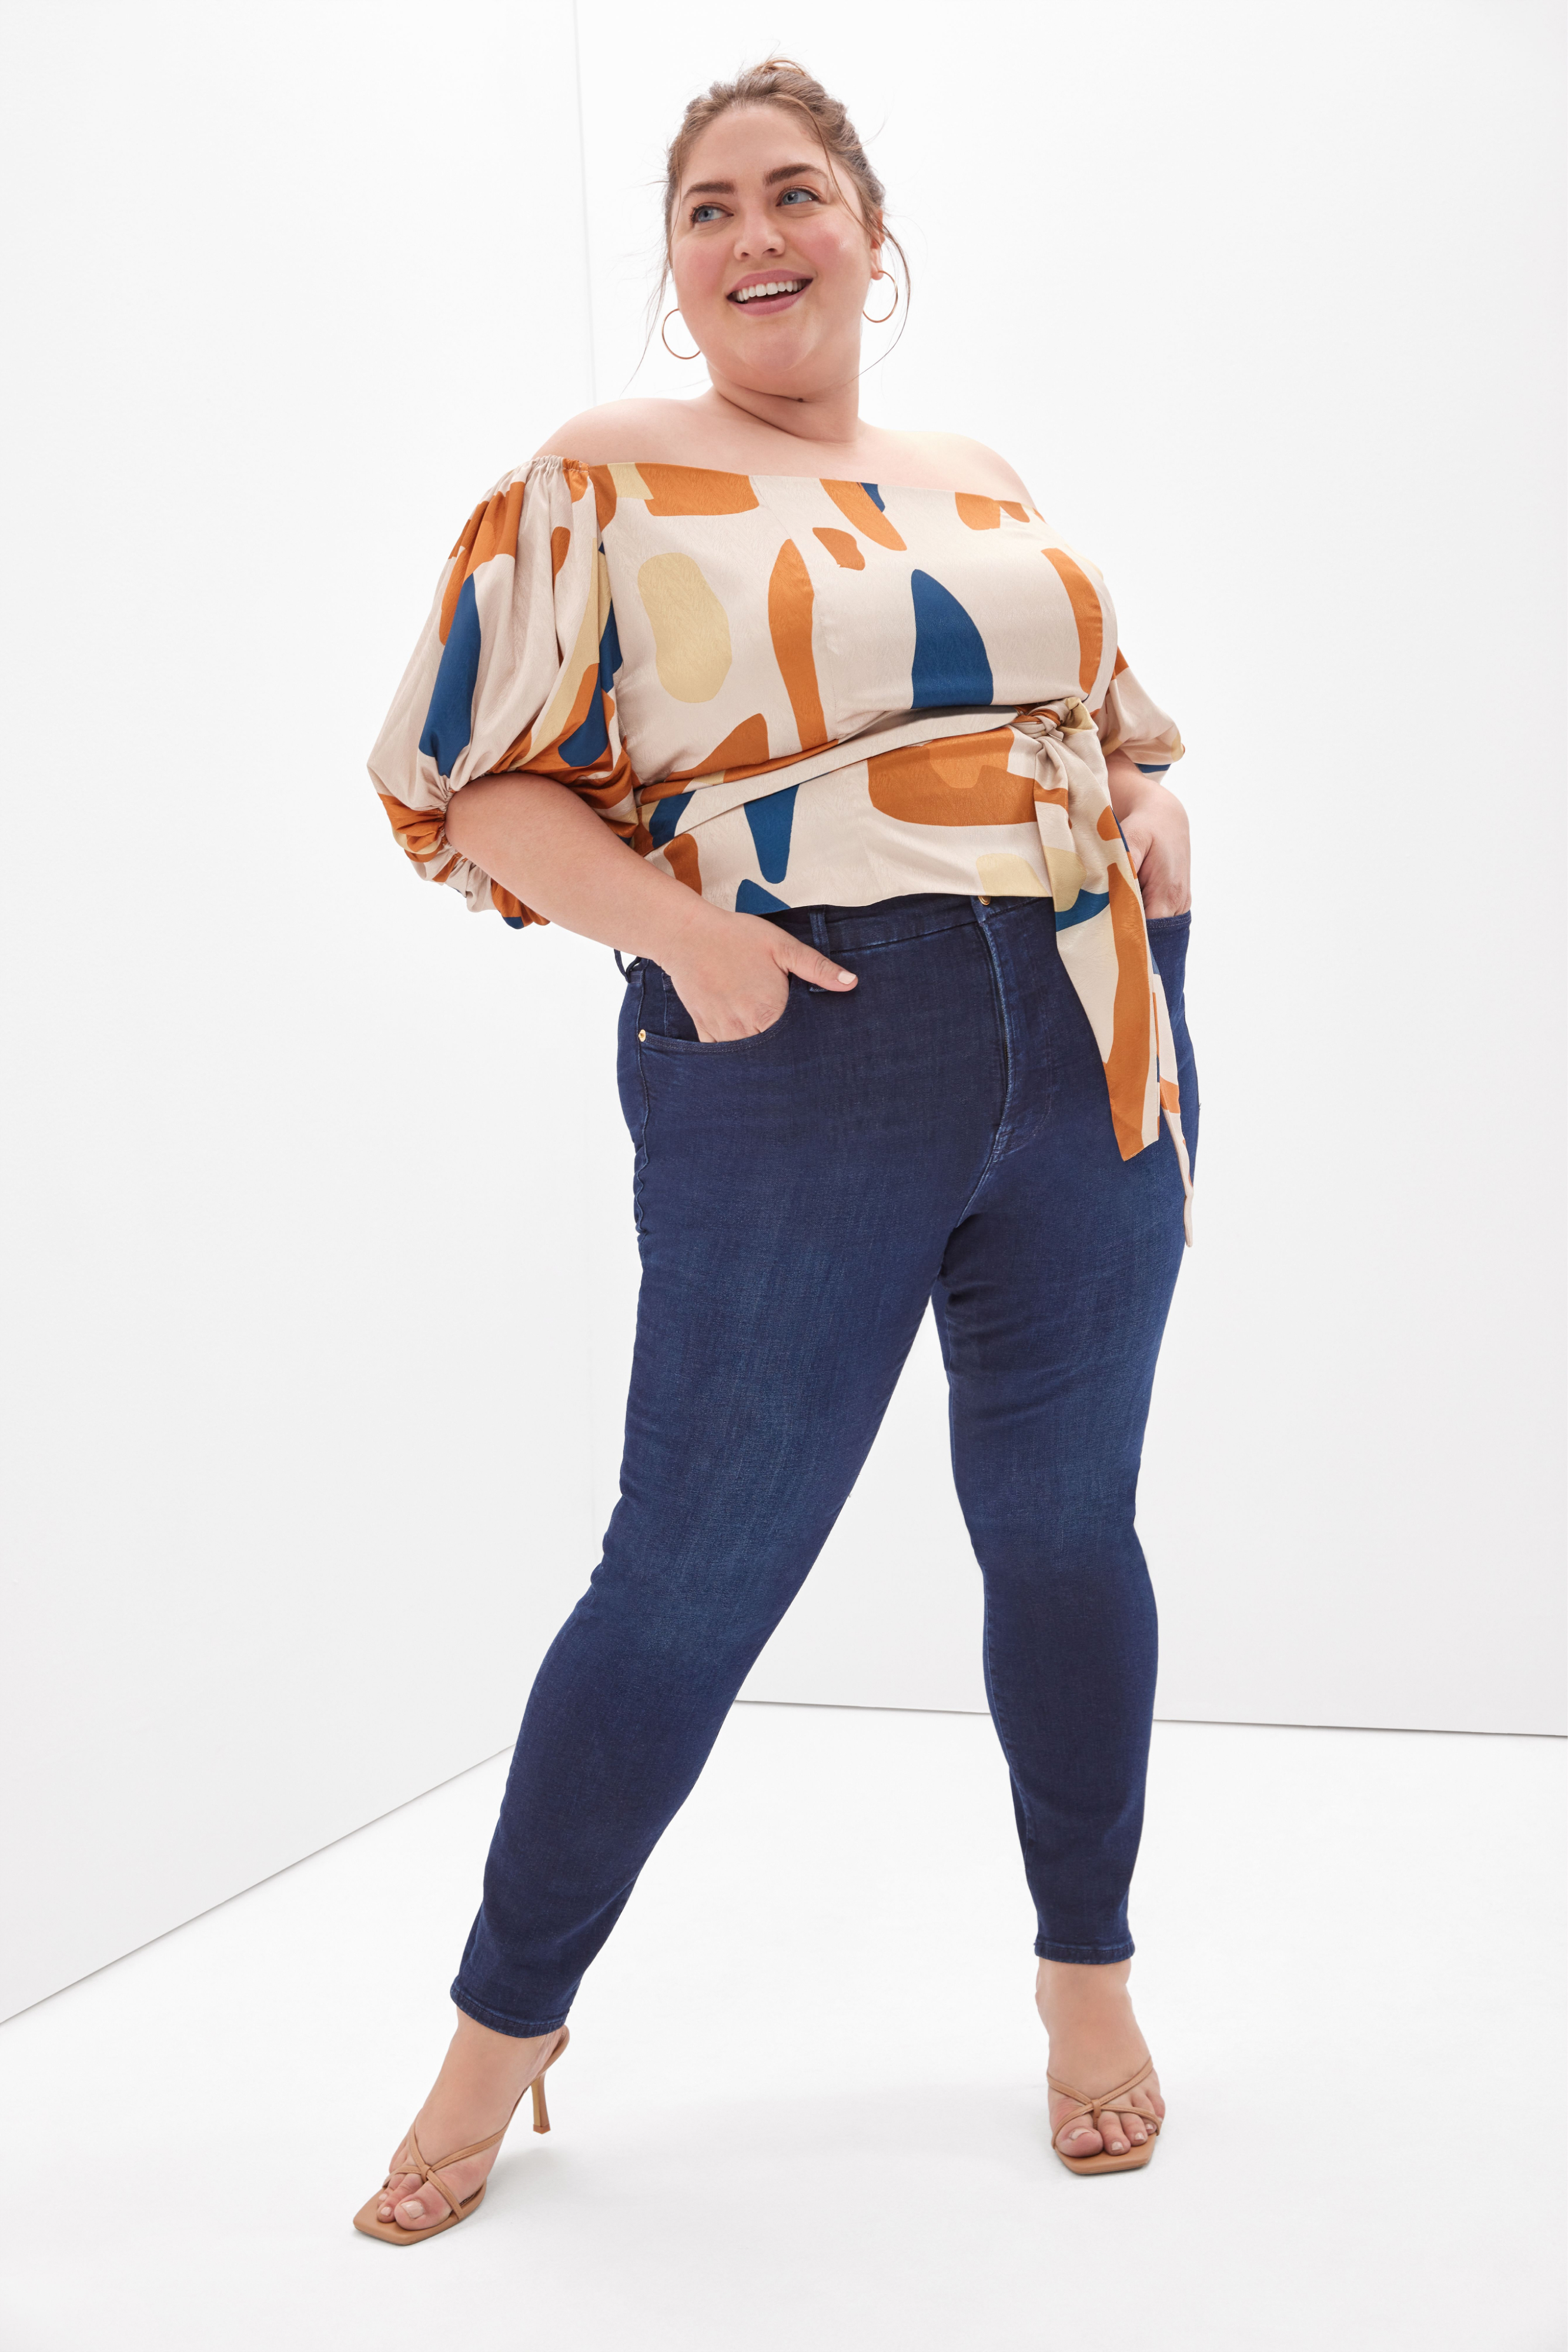 anden vigtig ovn Plus-Size Clothing for Women | Stitch Fix